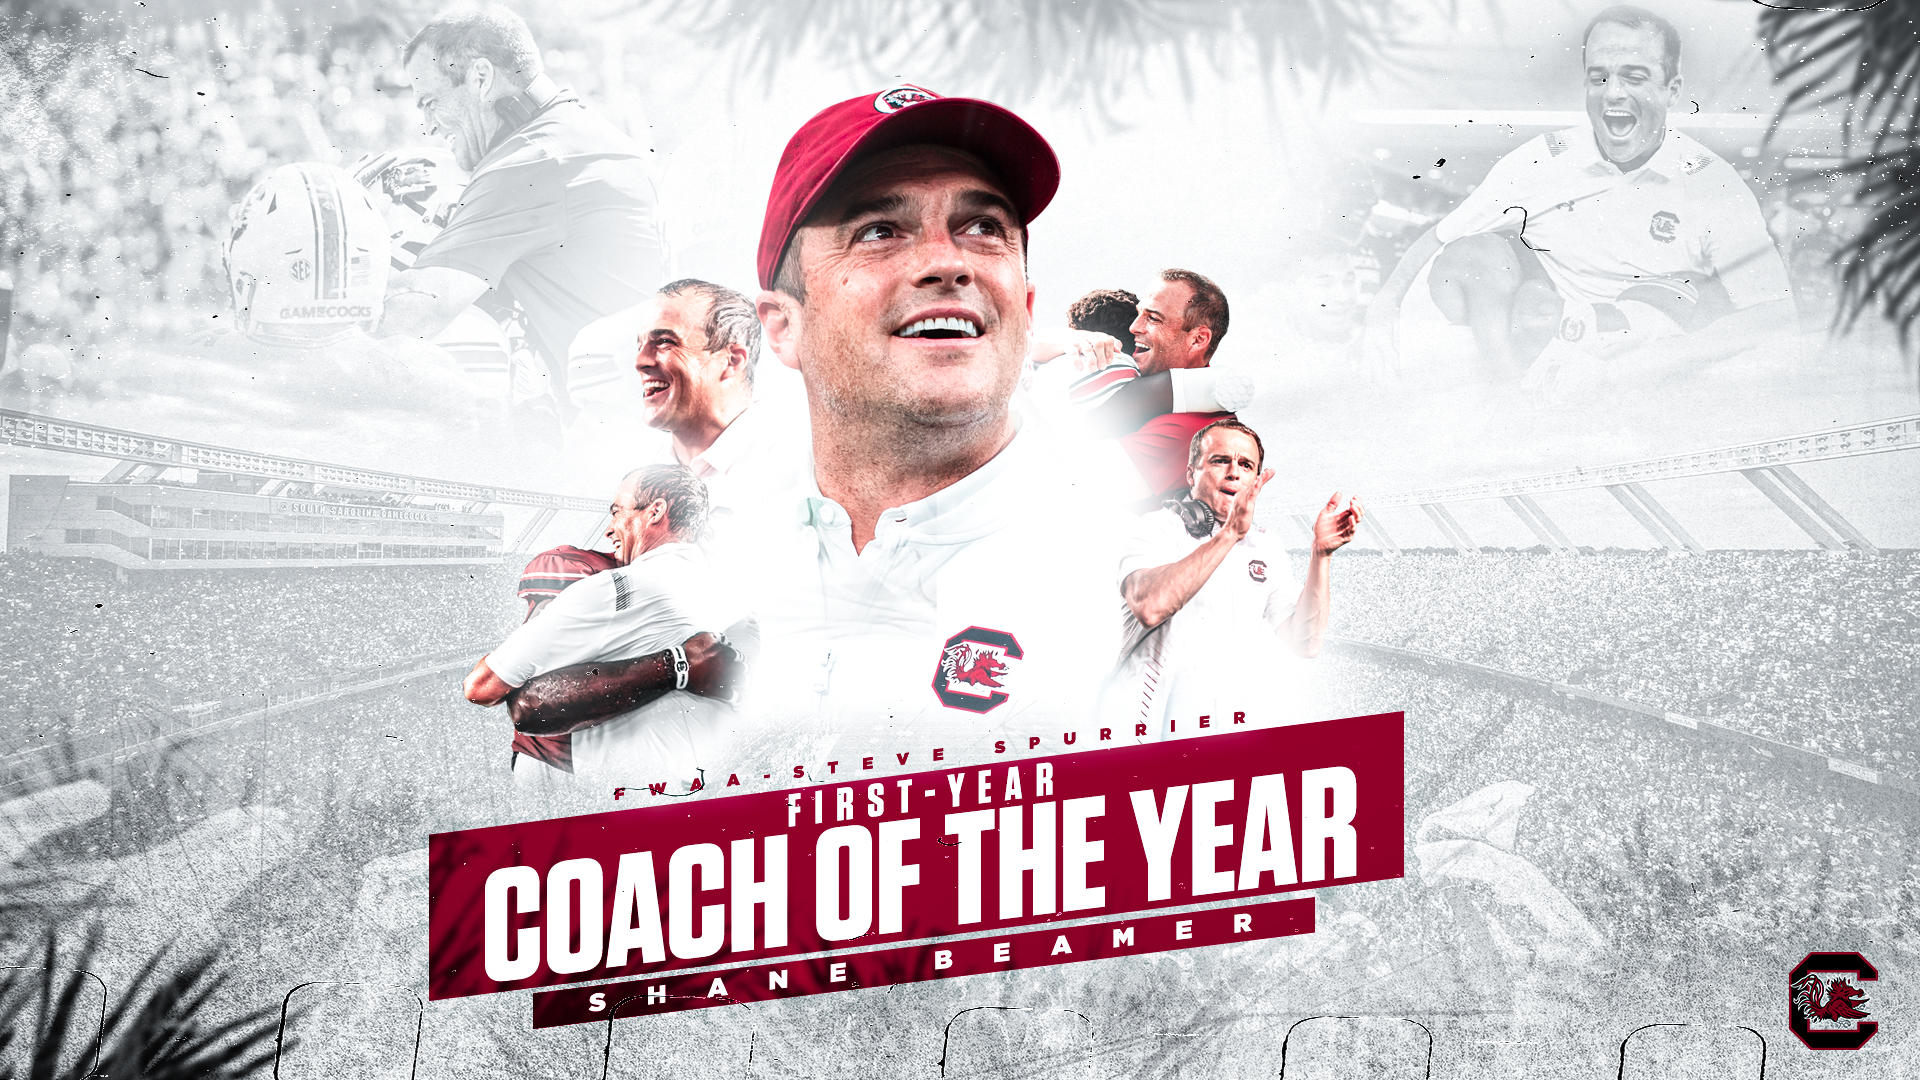 Beamer Named Co-Winner of the Steve Spurrier First-Year Coach of the Year